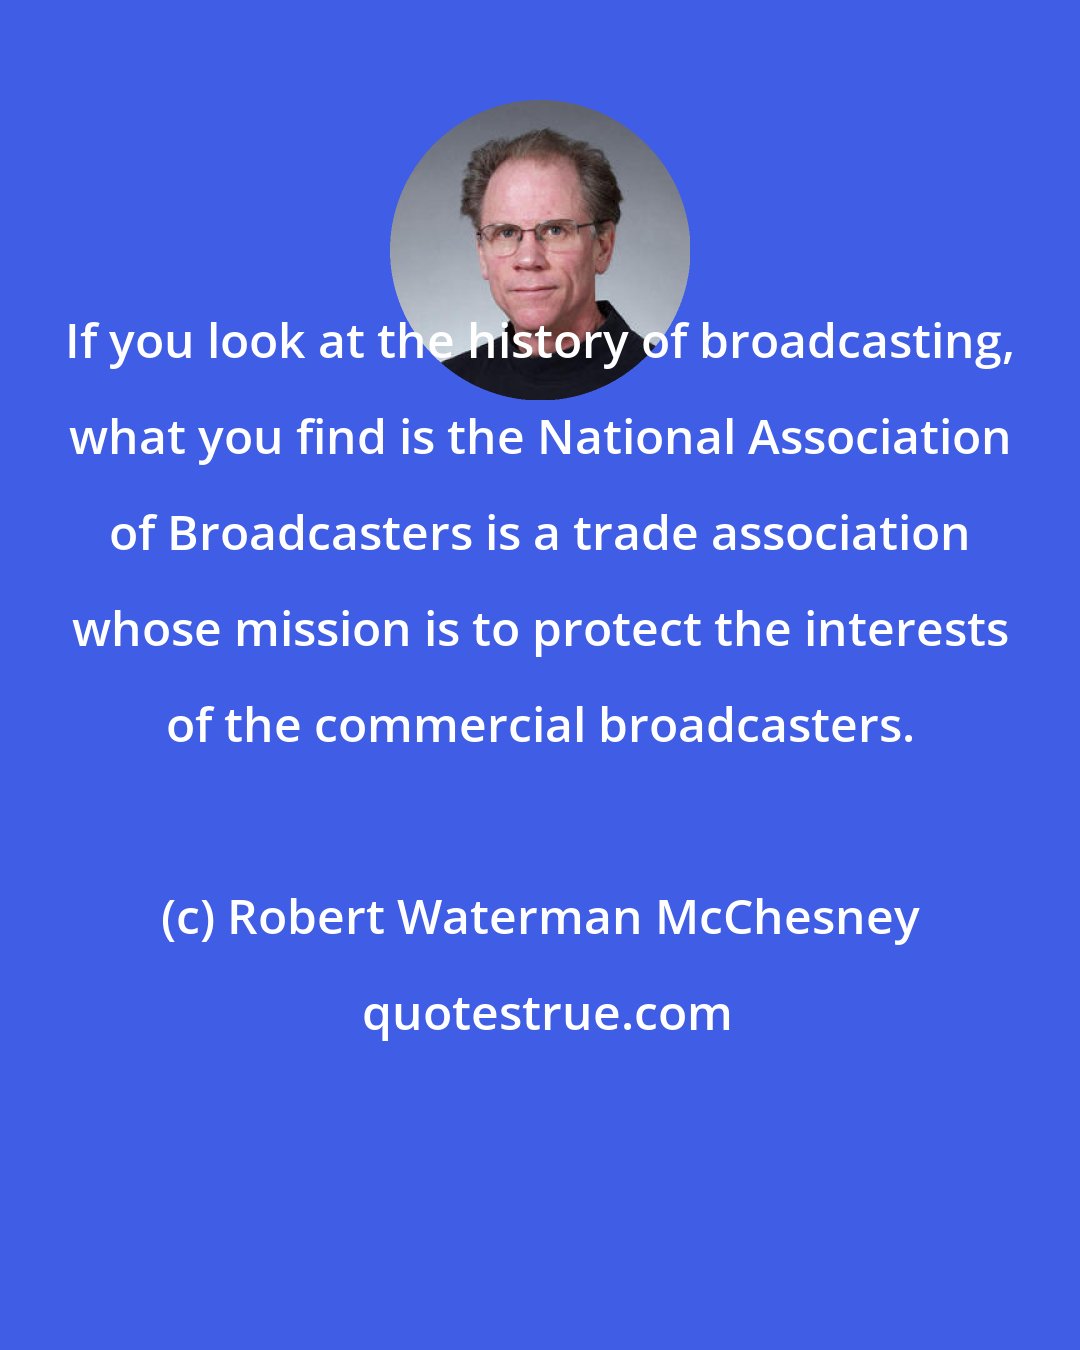 Robert Waterman McChesney: If you look at the history of broadcasting, what you find is the National Association of Broadcasters is a trade association whose mission is to protect the interests of the commercial broadcasters.